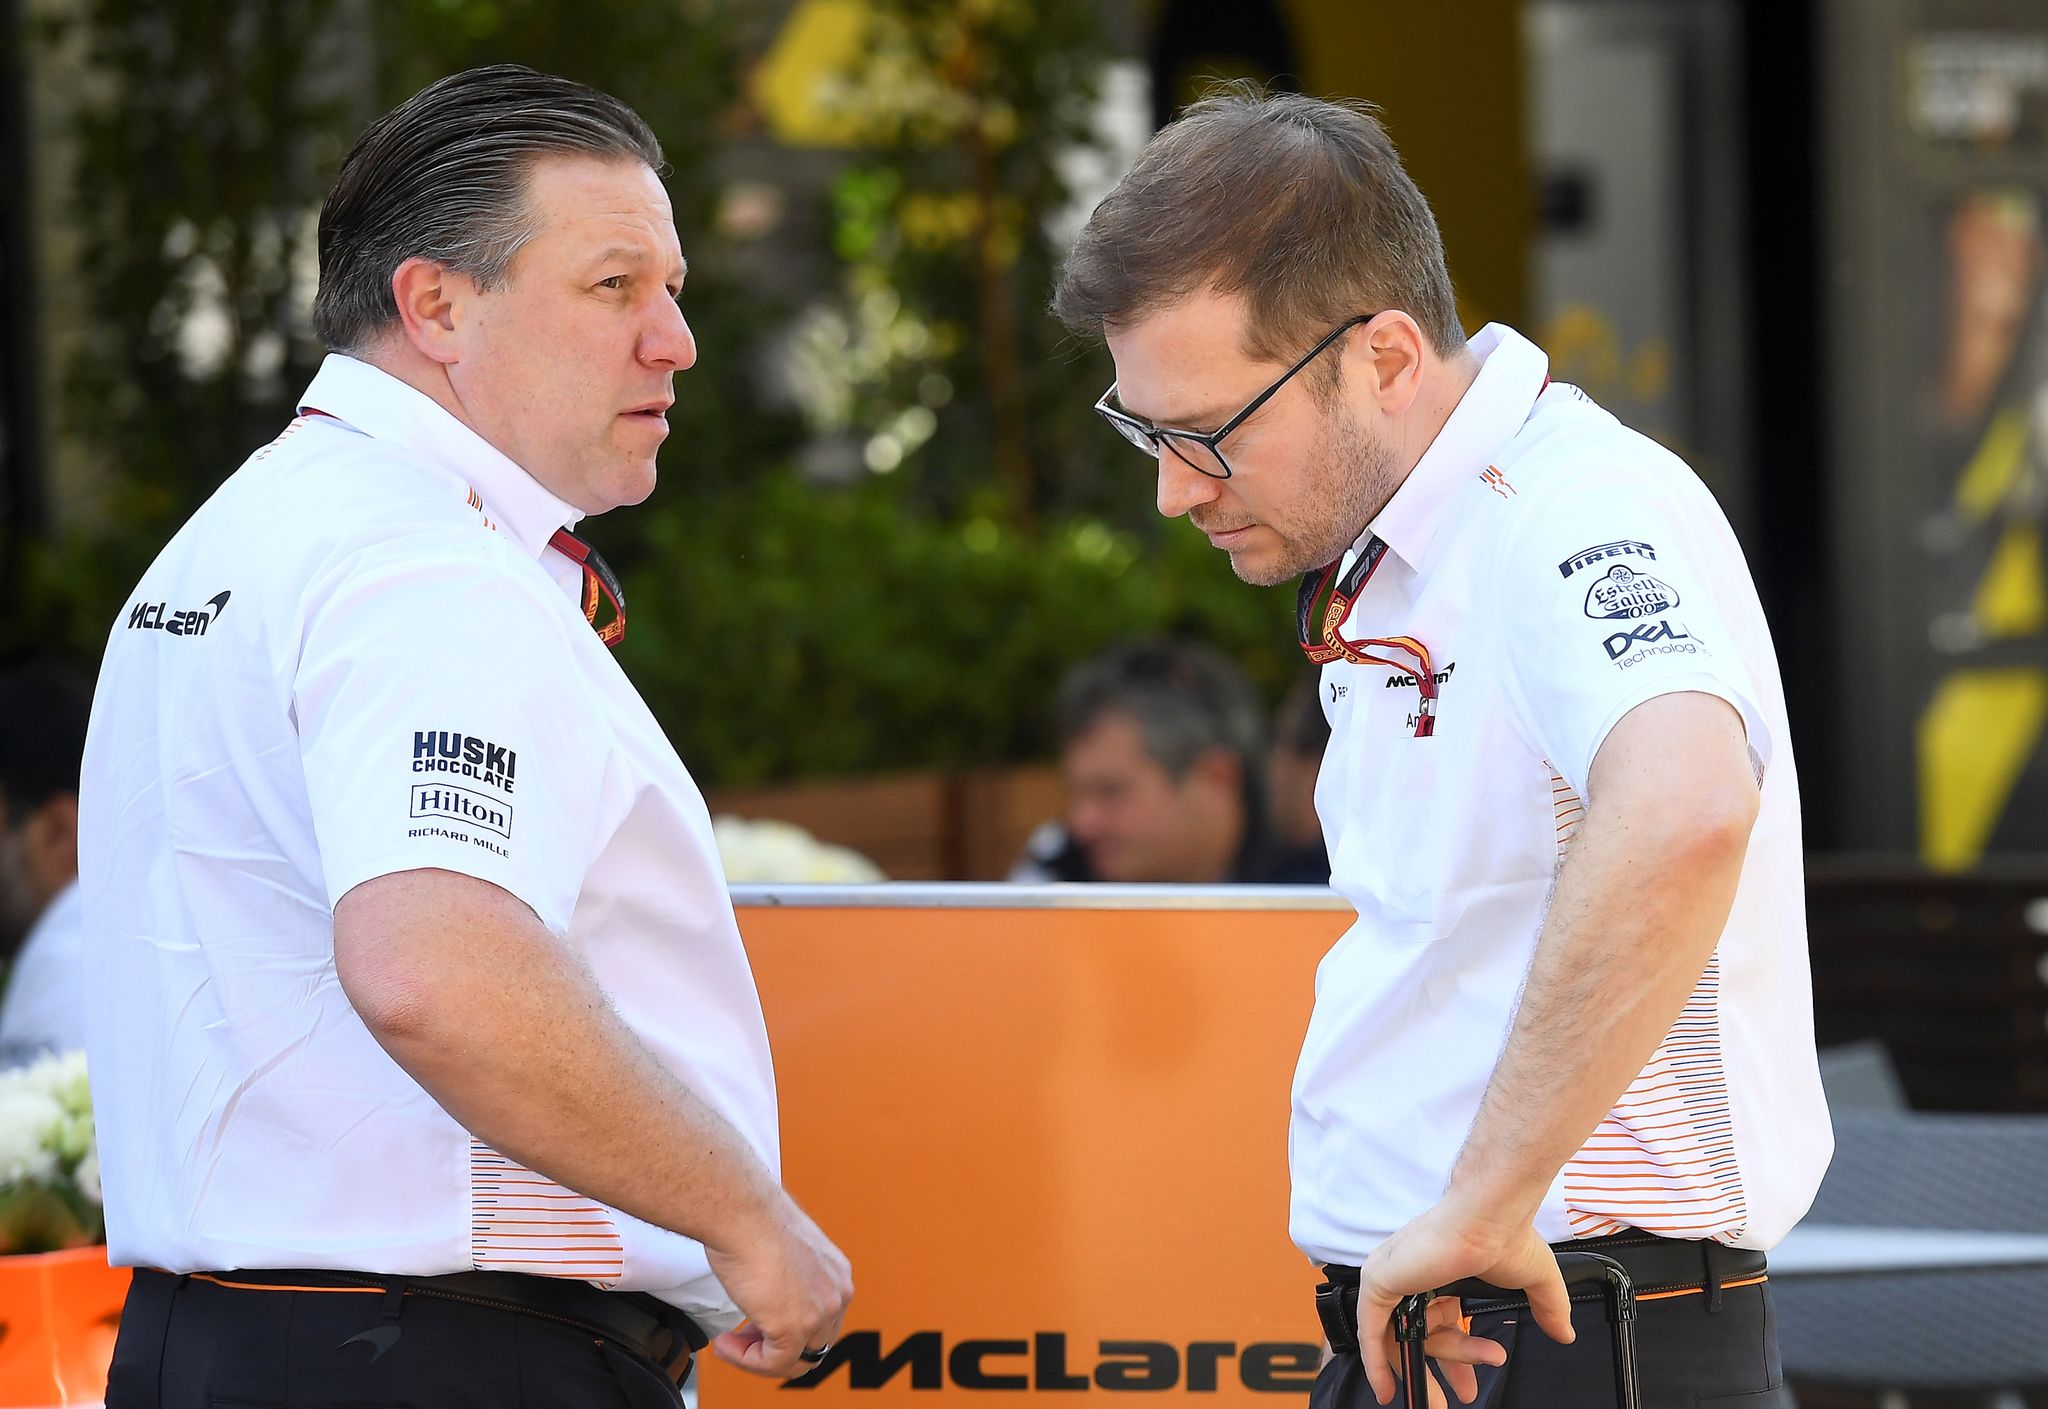 Zak Brown (L), chief executive of lt;HIT gt;McLaren lt;/HIT gt; Racing, talks to a team member in Melbourne on March 12, 2020, ahead of the Formula One Australian Grand Prix. (Photo by William WEST / AFP) / -- IMAGE RESTRICTED TO EDITORIAL USE - STRICTLY NO COMMERCIAL USE --